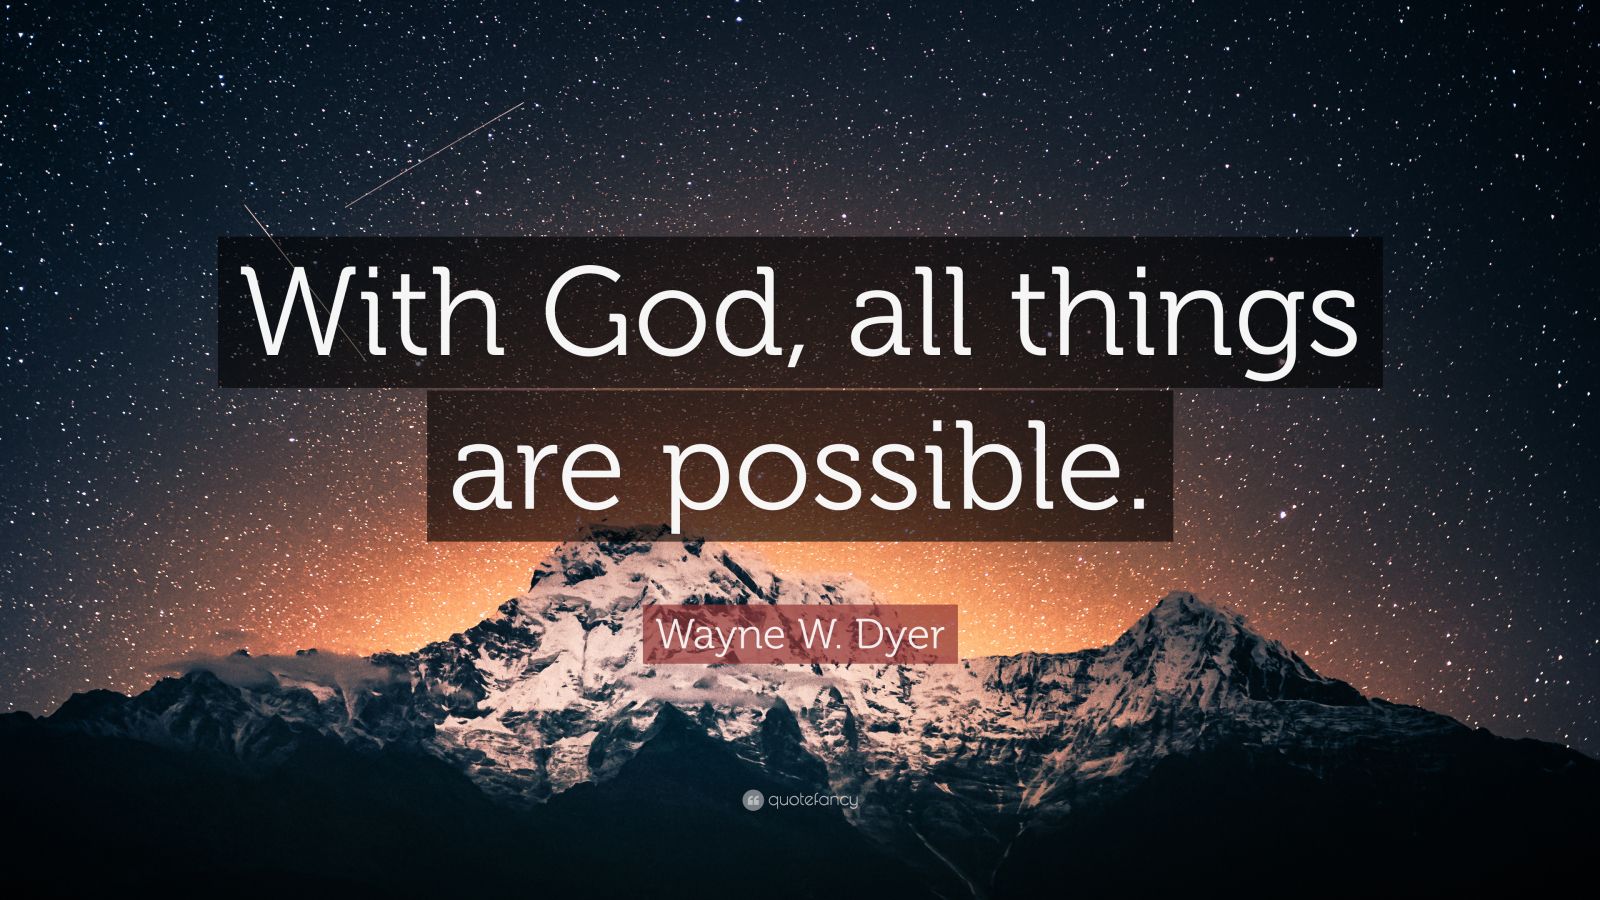 Wayne W. Dyer Quote: “With God, all things are possible.” (12